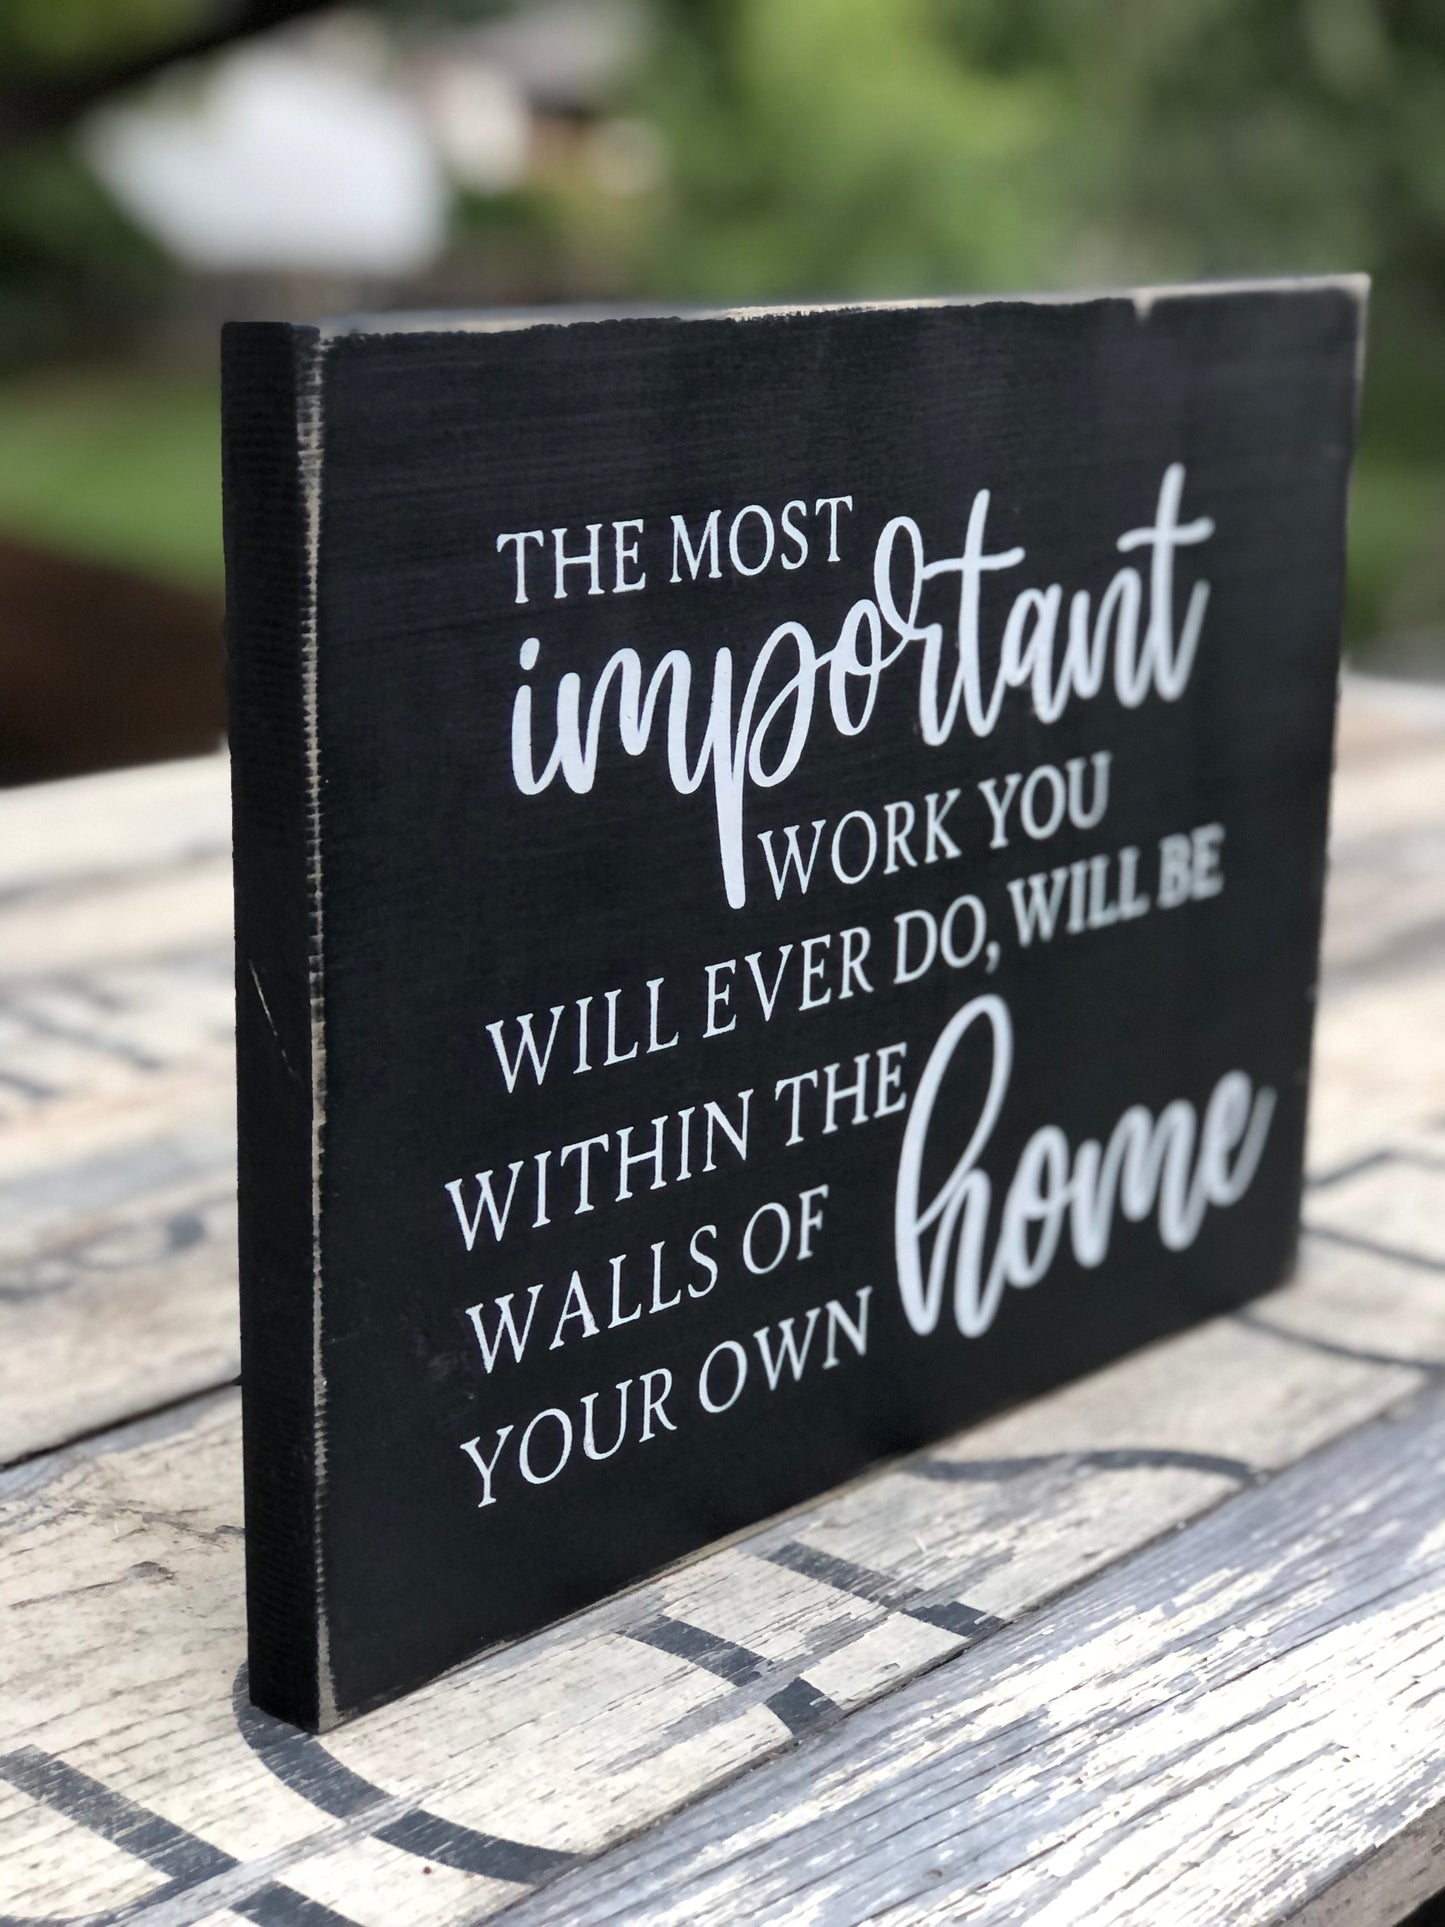 THE MOST IMPORTANT WORK YOU WILL EVER DO WILL BE WITHIN THE WALLS OF YOUR OWN HOME - WOOD SIGN